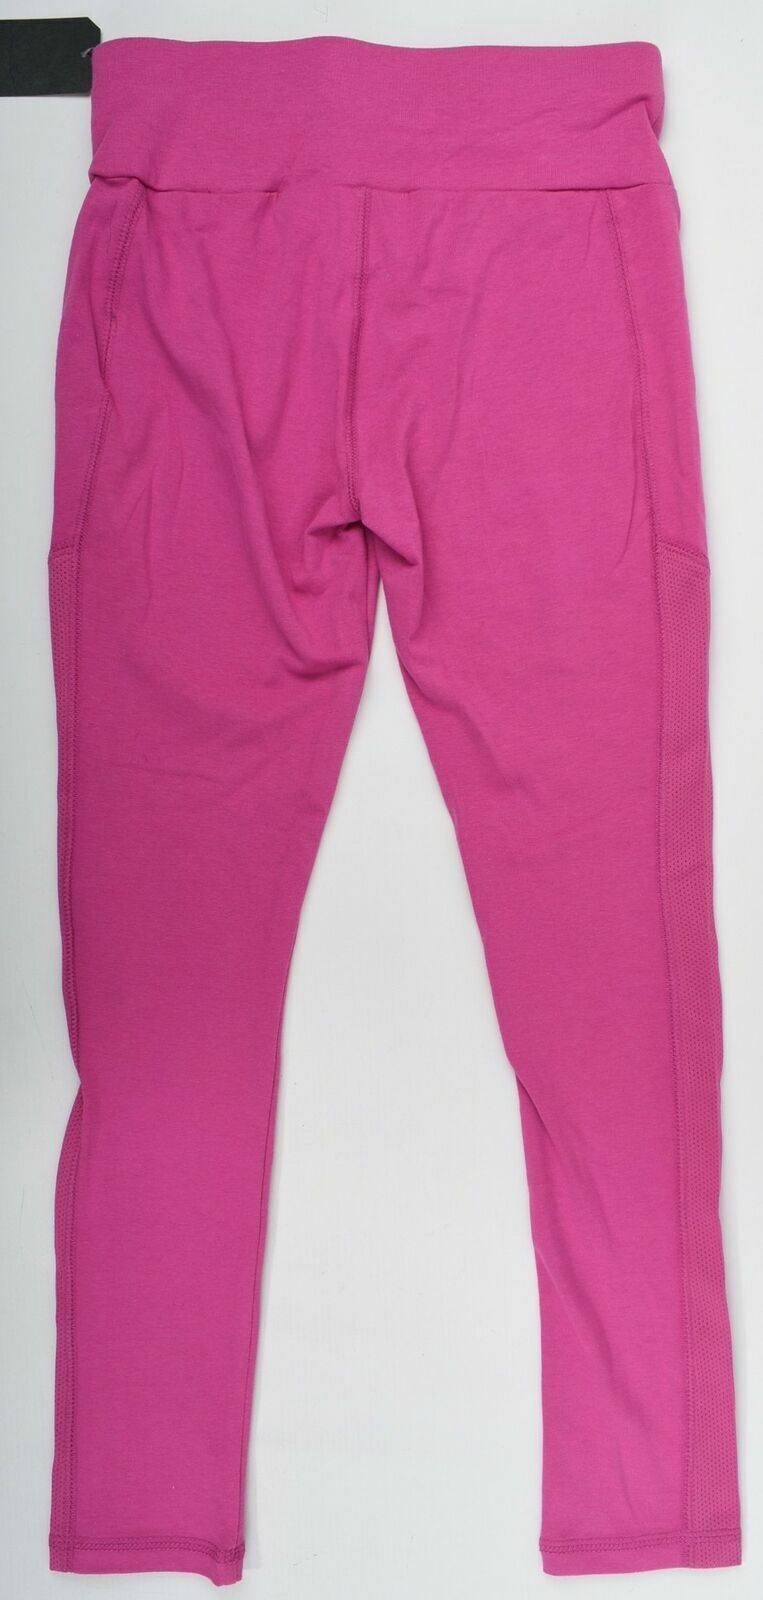 CONVERSE ALL-STAR Girl's Pink Leggings- size 4 years to 5 years